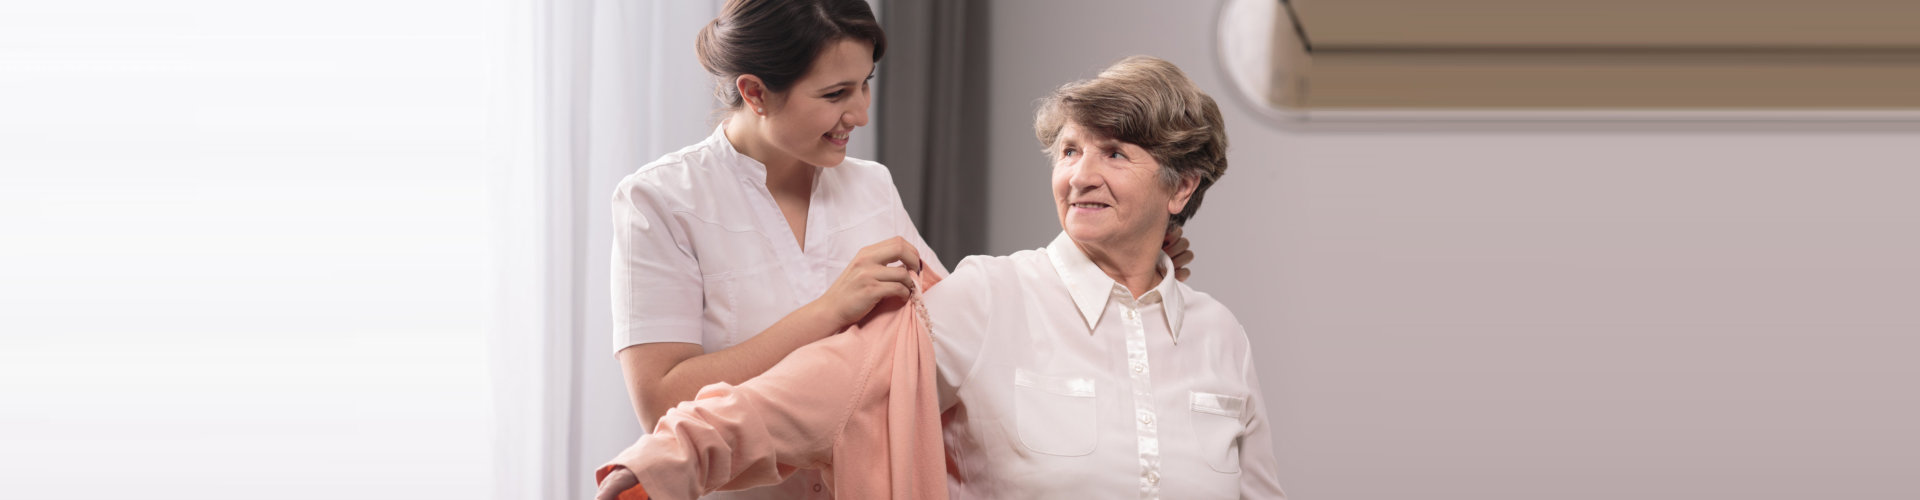 caregiver assisting elder woman on wearing a polo shirt concept